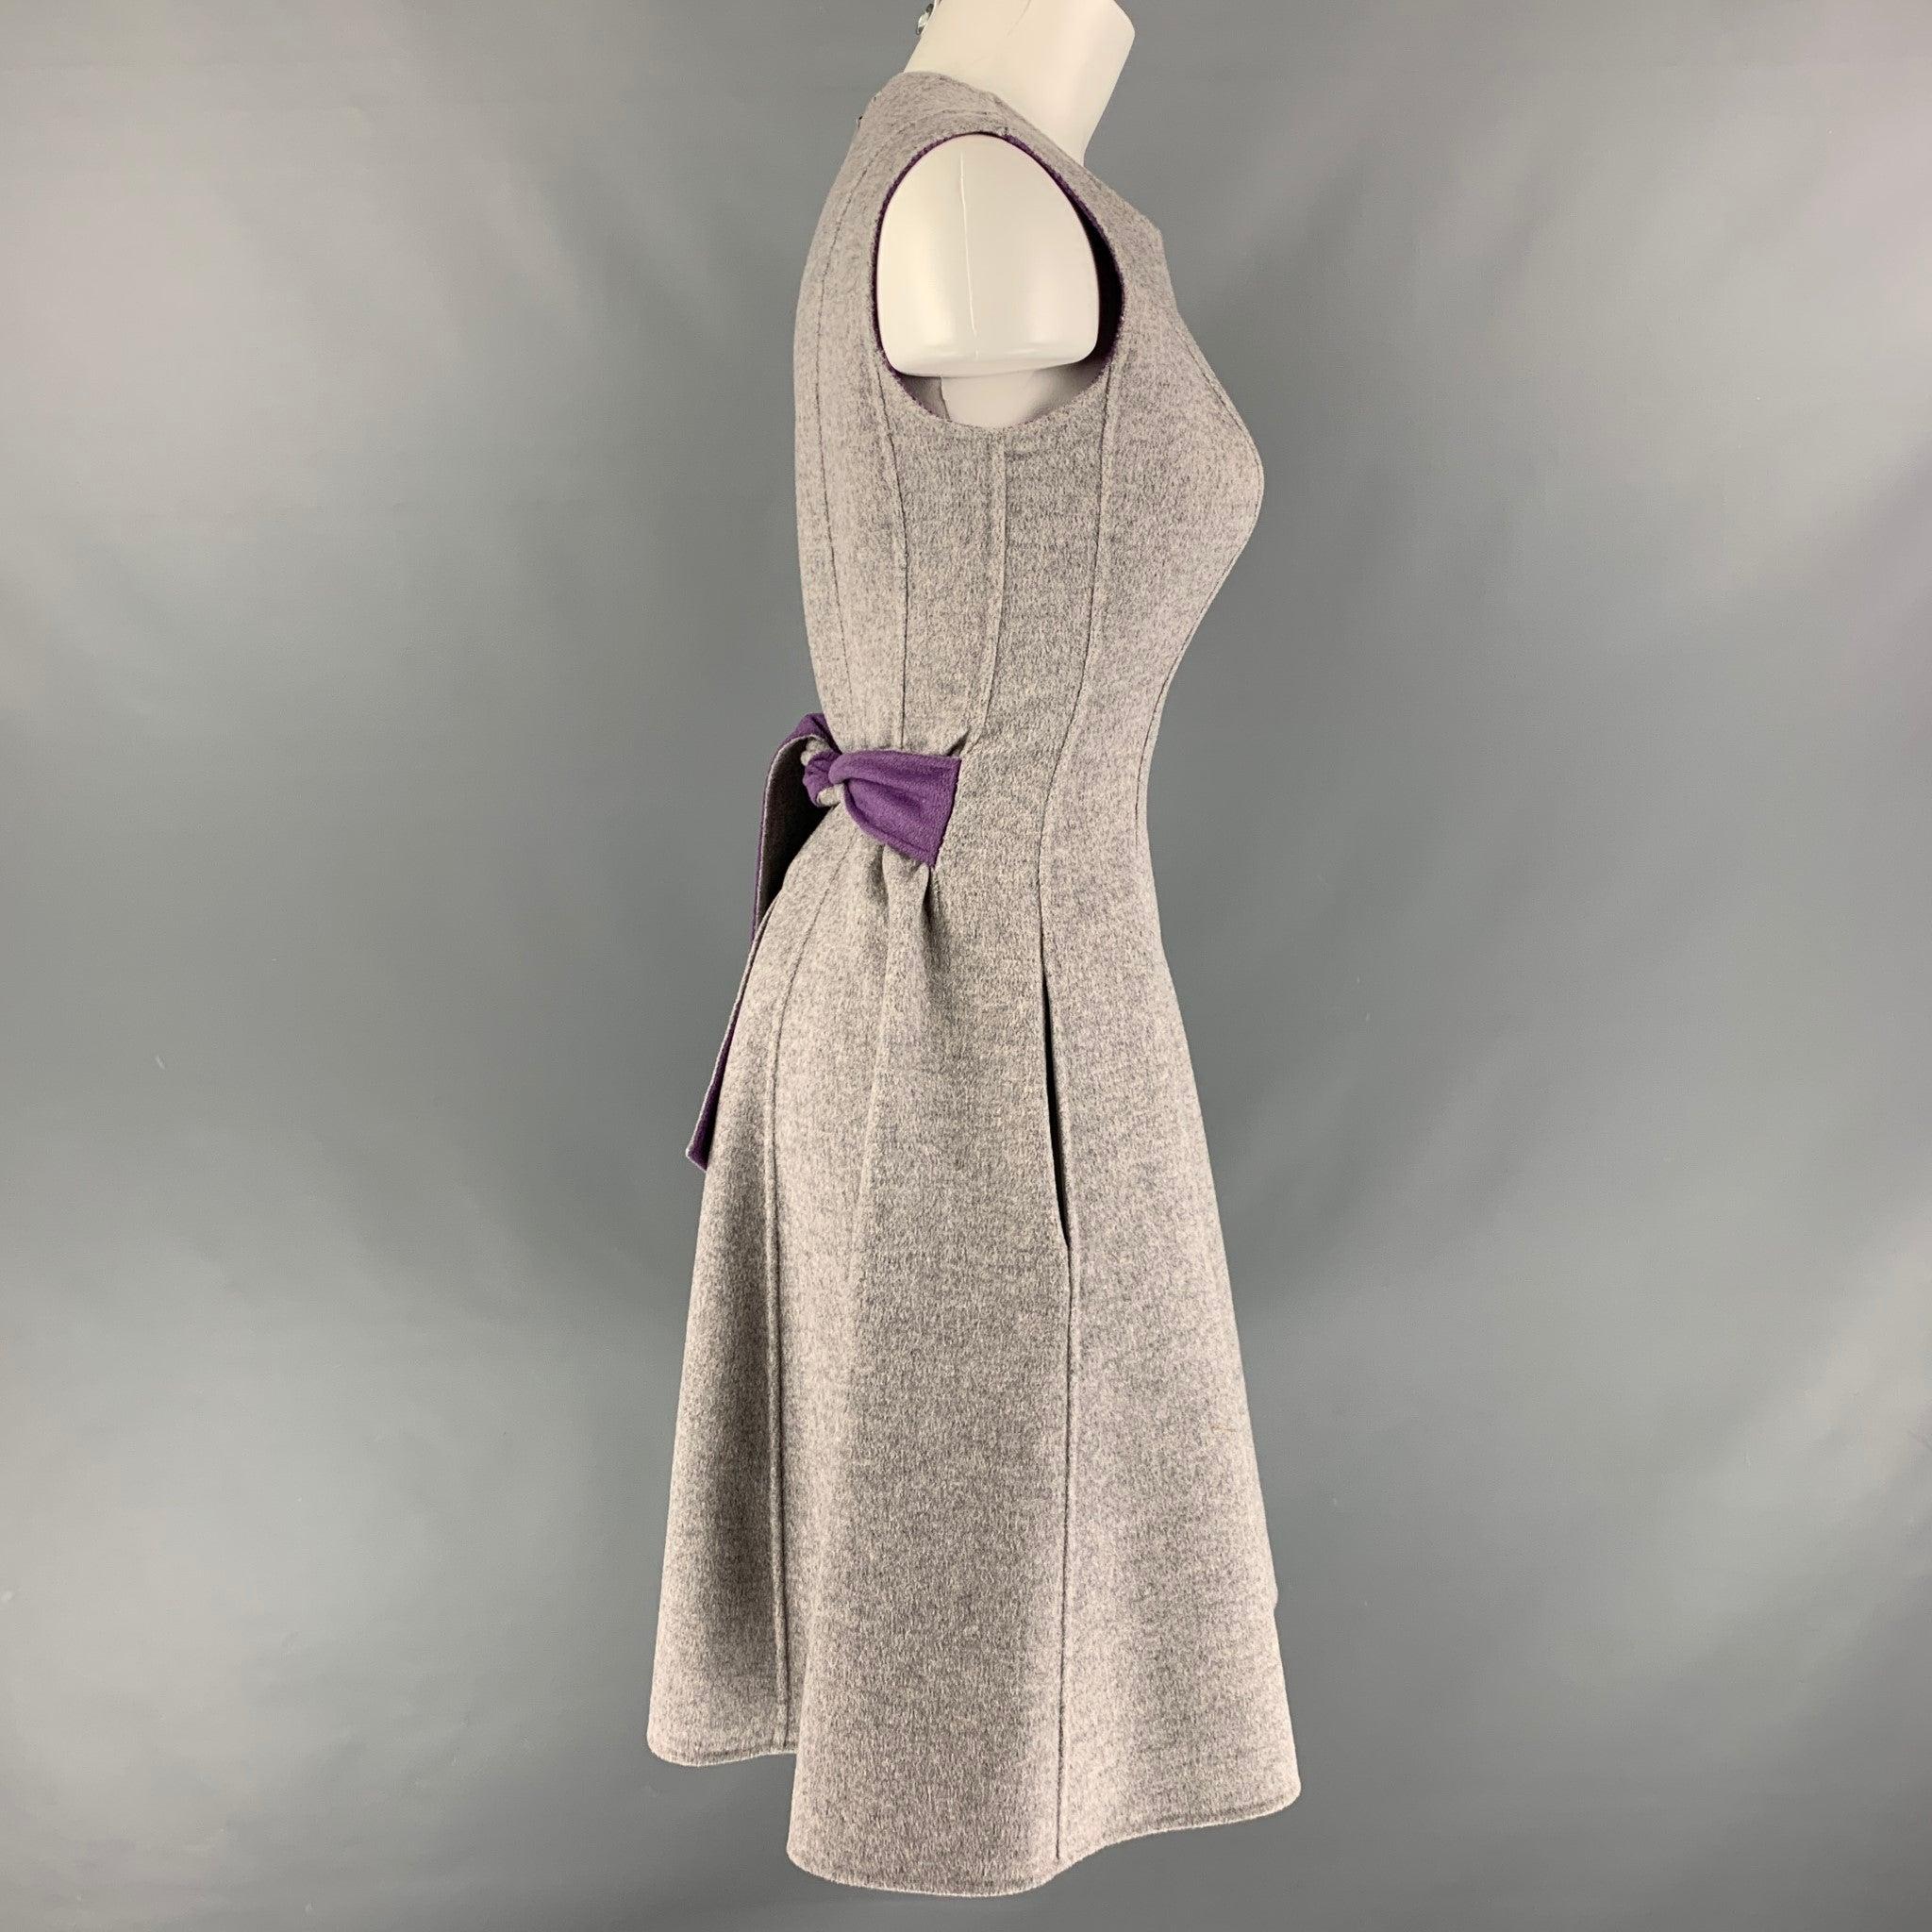 CAROLINA HERRERA dress comes in a grey and purple heather wool fabric featuring two pockets, sleeveless style, a-line silhouette, belt at back and full back zipper closure. Very Good Pre-Owned Condition. 

Marked:   4 

Measurements: 
 
Shoulder: 15